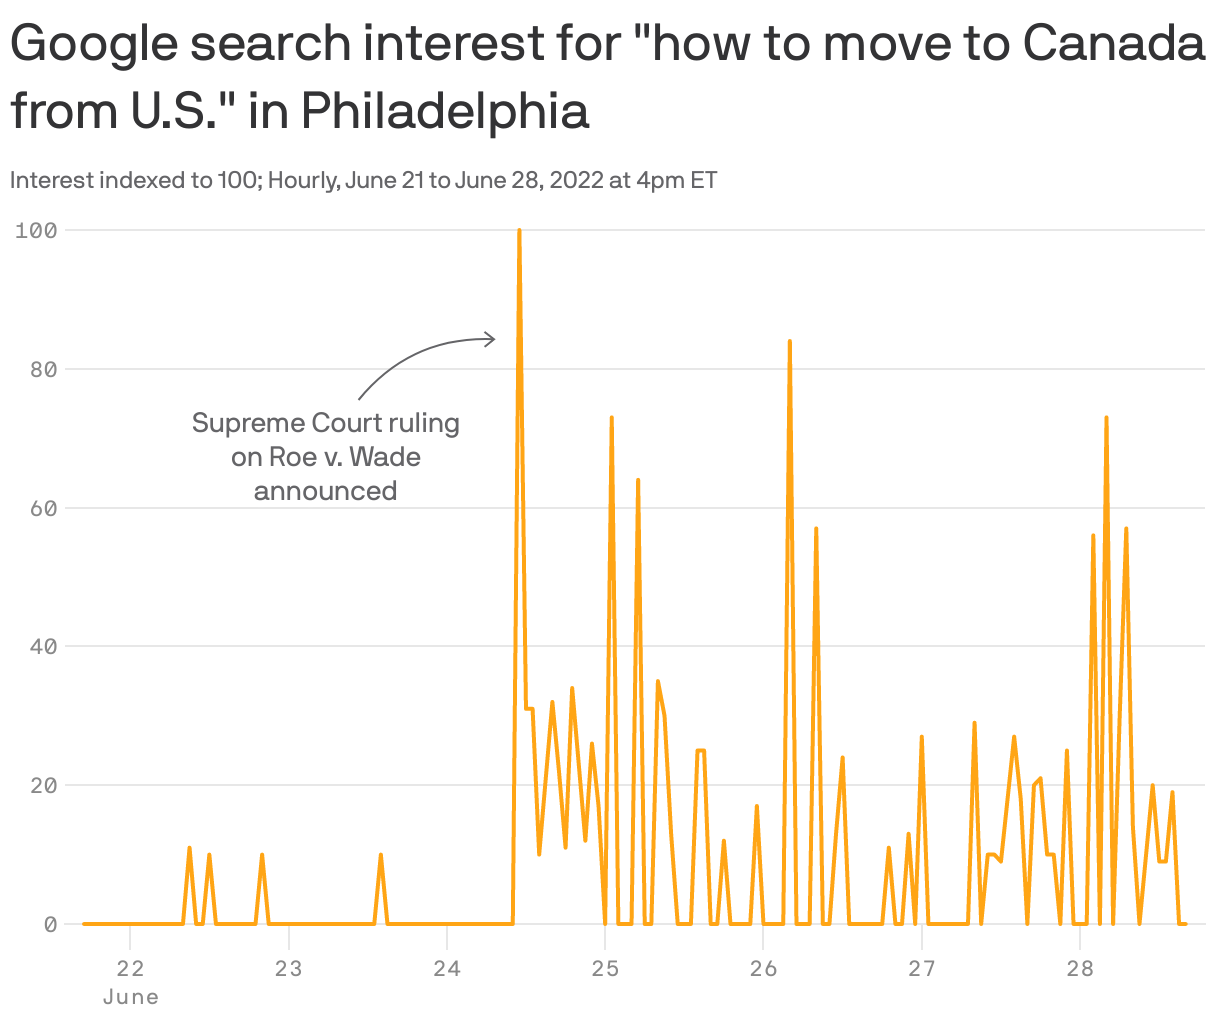 Google search interest for "how to move to Canada from U.S." in Philadelphia